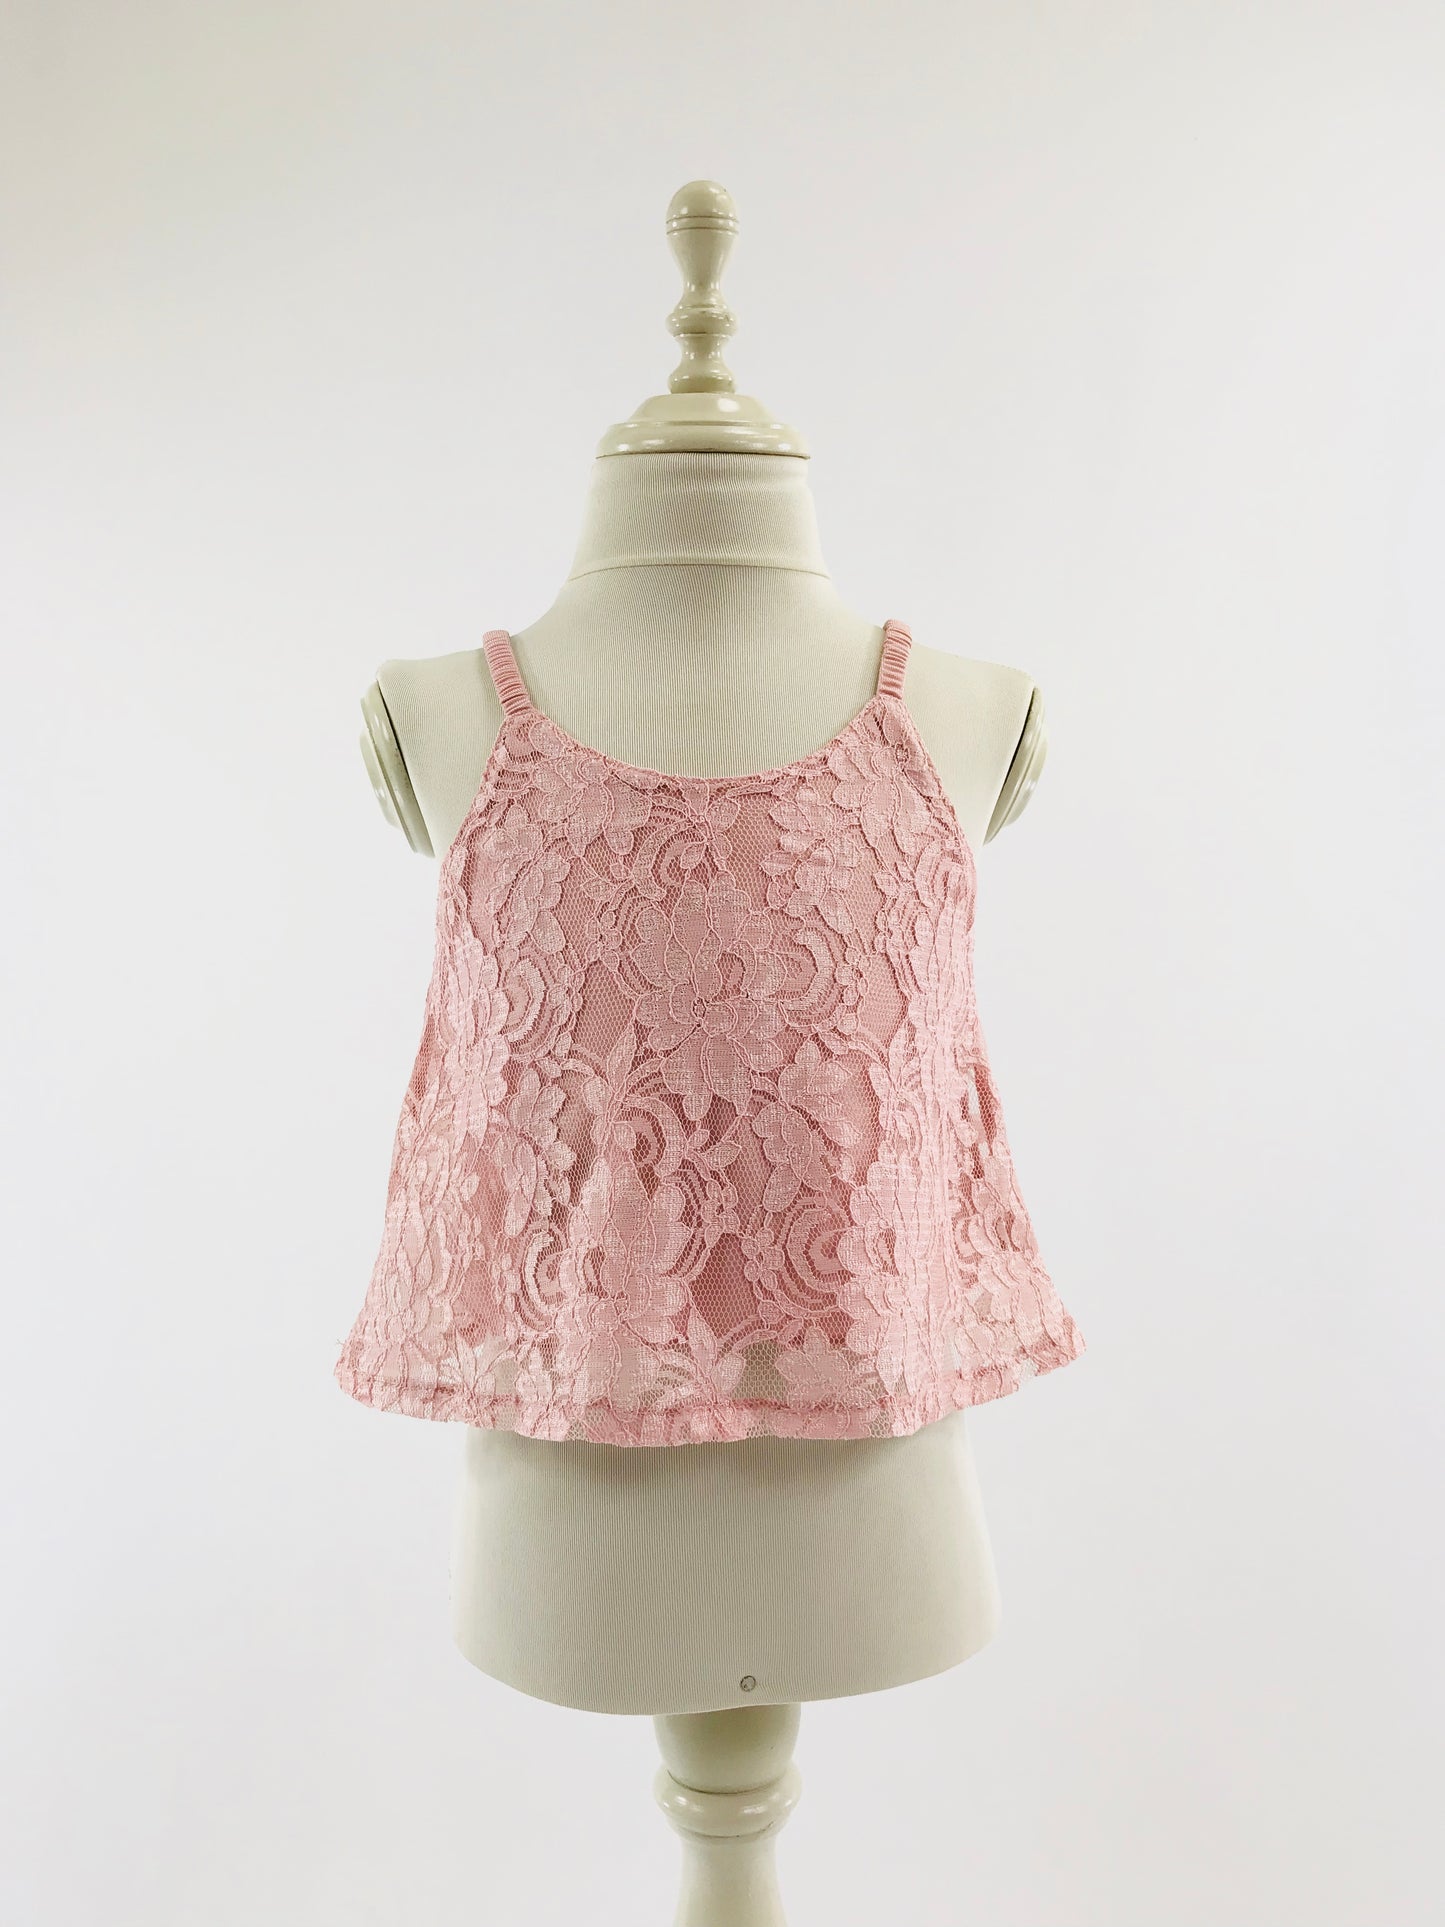 [OUTLET] DOLLY by Le Petit Tom ® LACY SPAGHETTI TOP pink